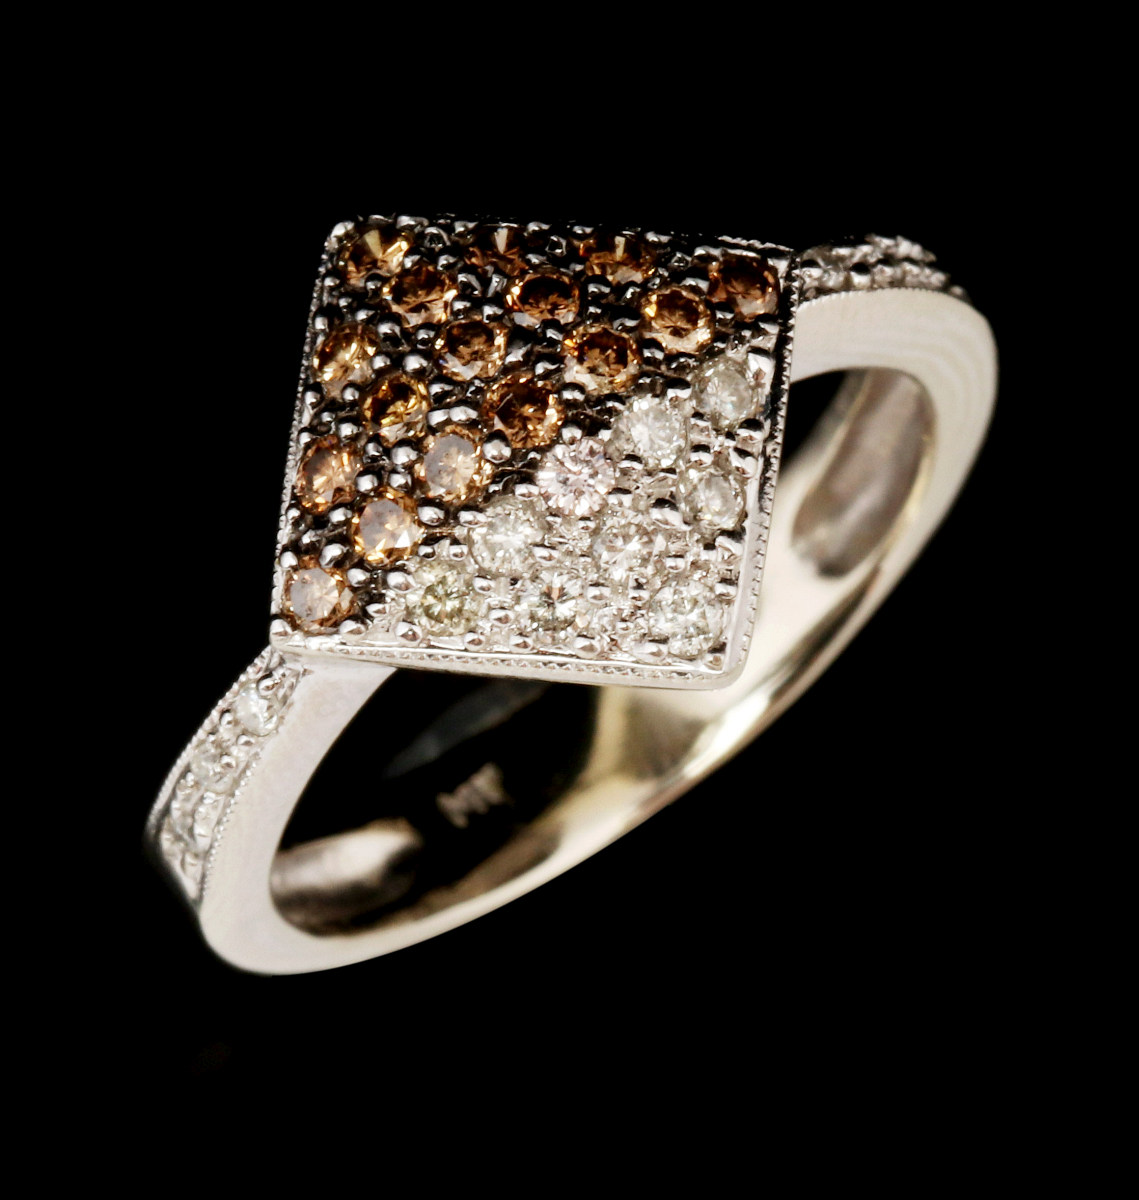 A BROWN AND WHITE DIAMOND 14K GOLD FASHION RING